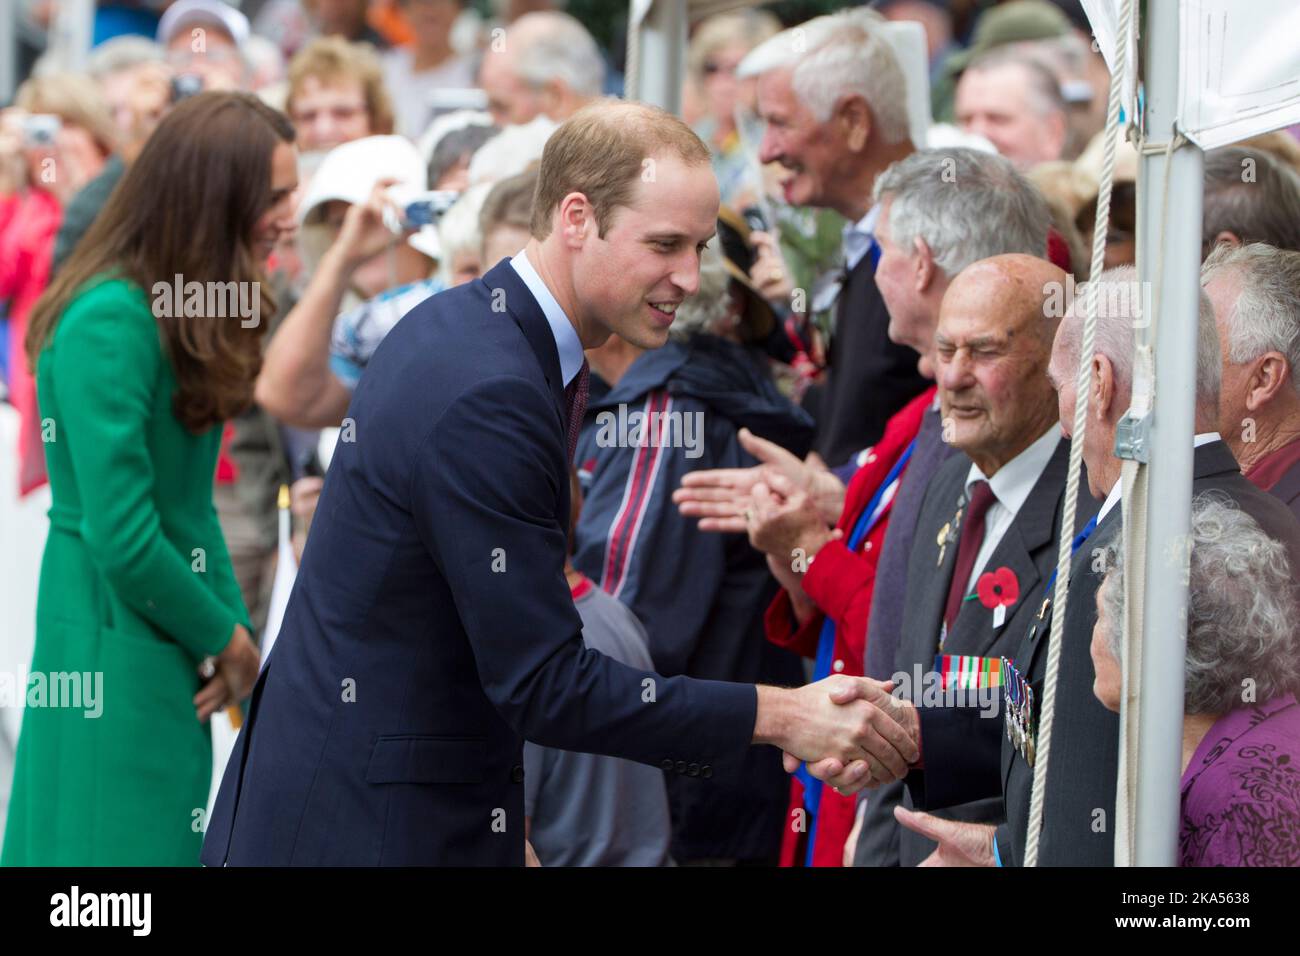 The Duke and Duchess of Cambridge meet members of the public after placing two roses on the War Memorial, Cambridge, New Zealand, Saturday, April 12, Stock Photo